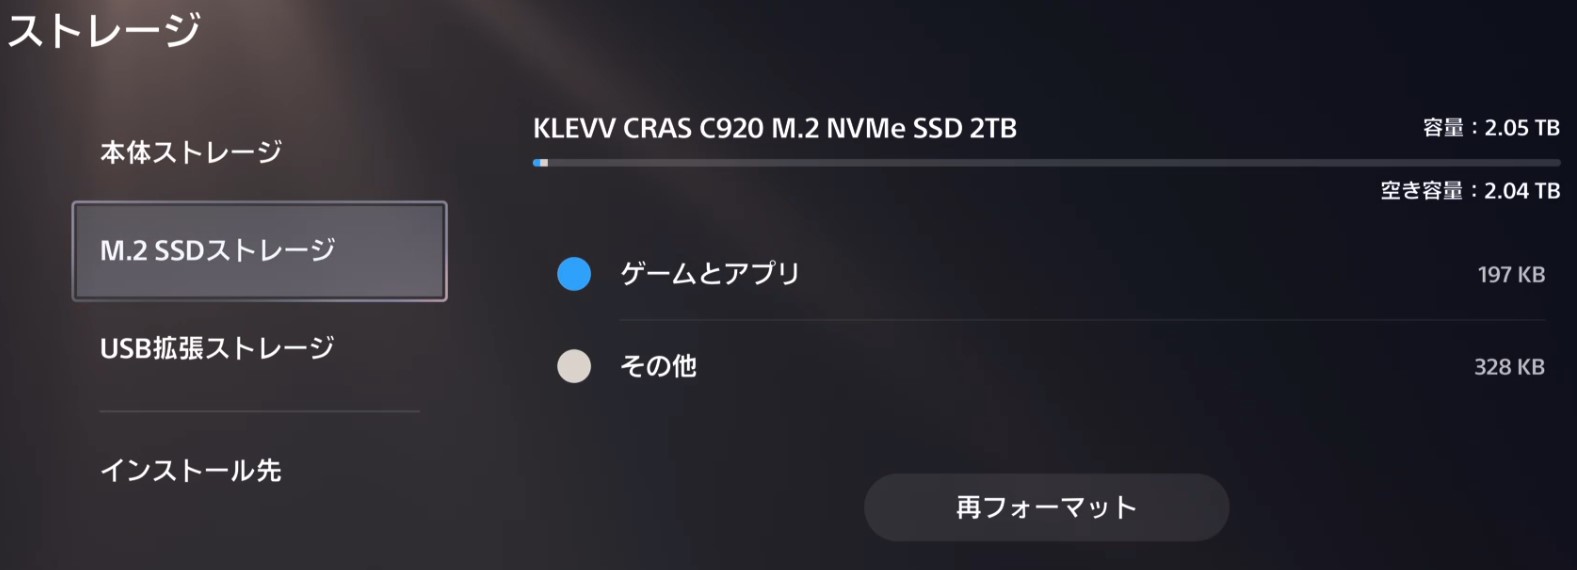 PS5 拡張M.2 SSD 取り付け